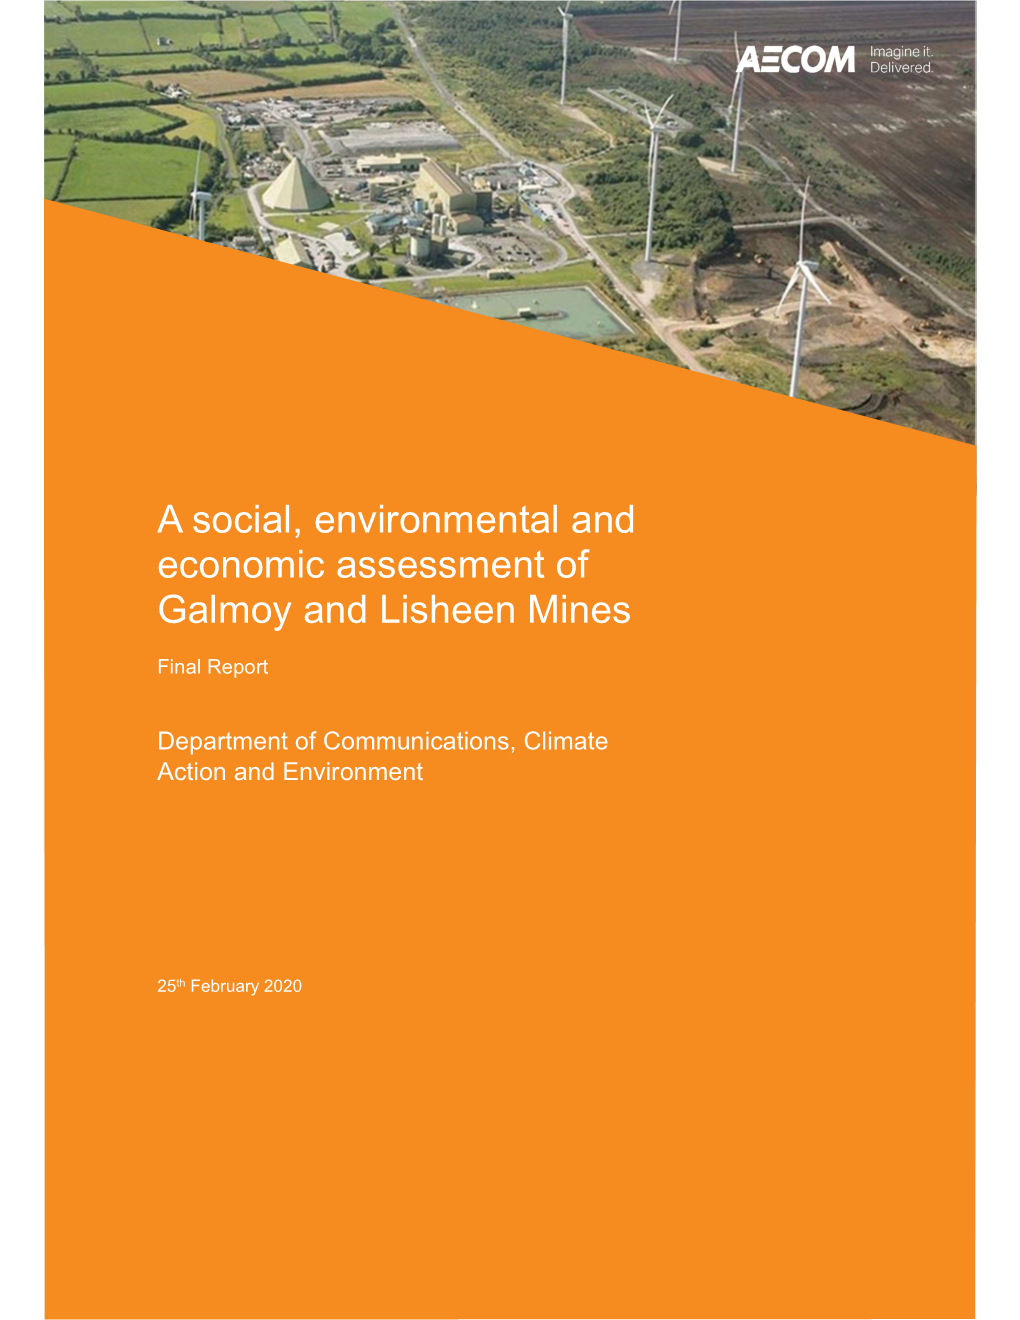 A Social, Environmental and Economic Assessment of Galmoy and Lisheen Mines